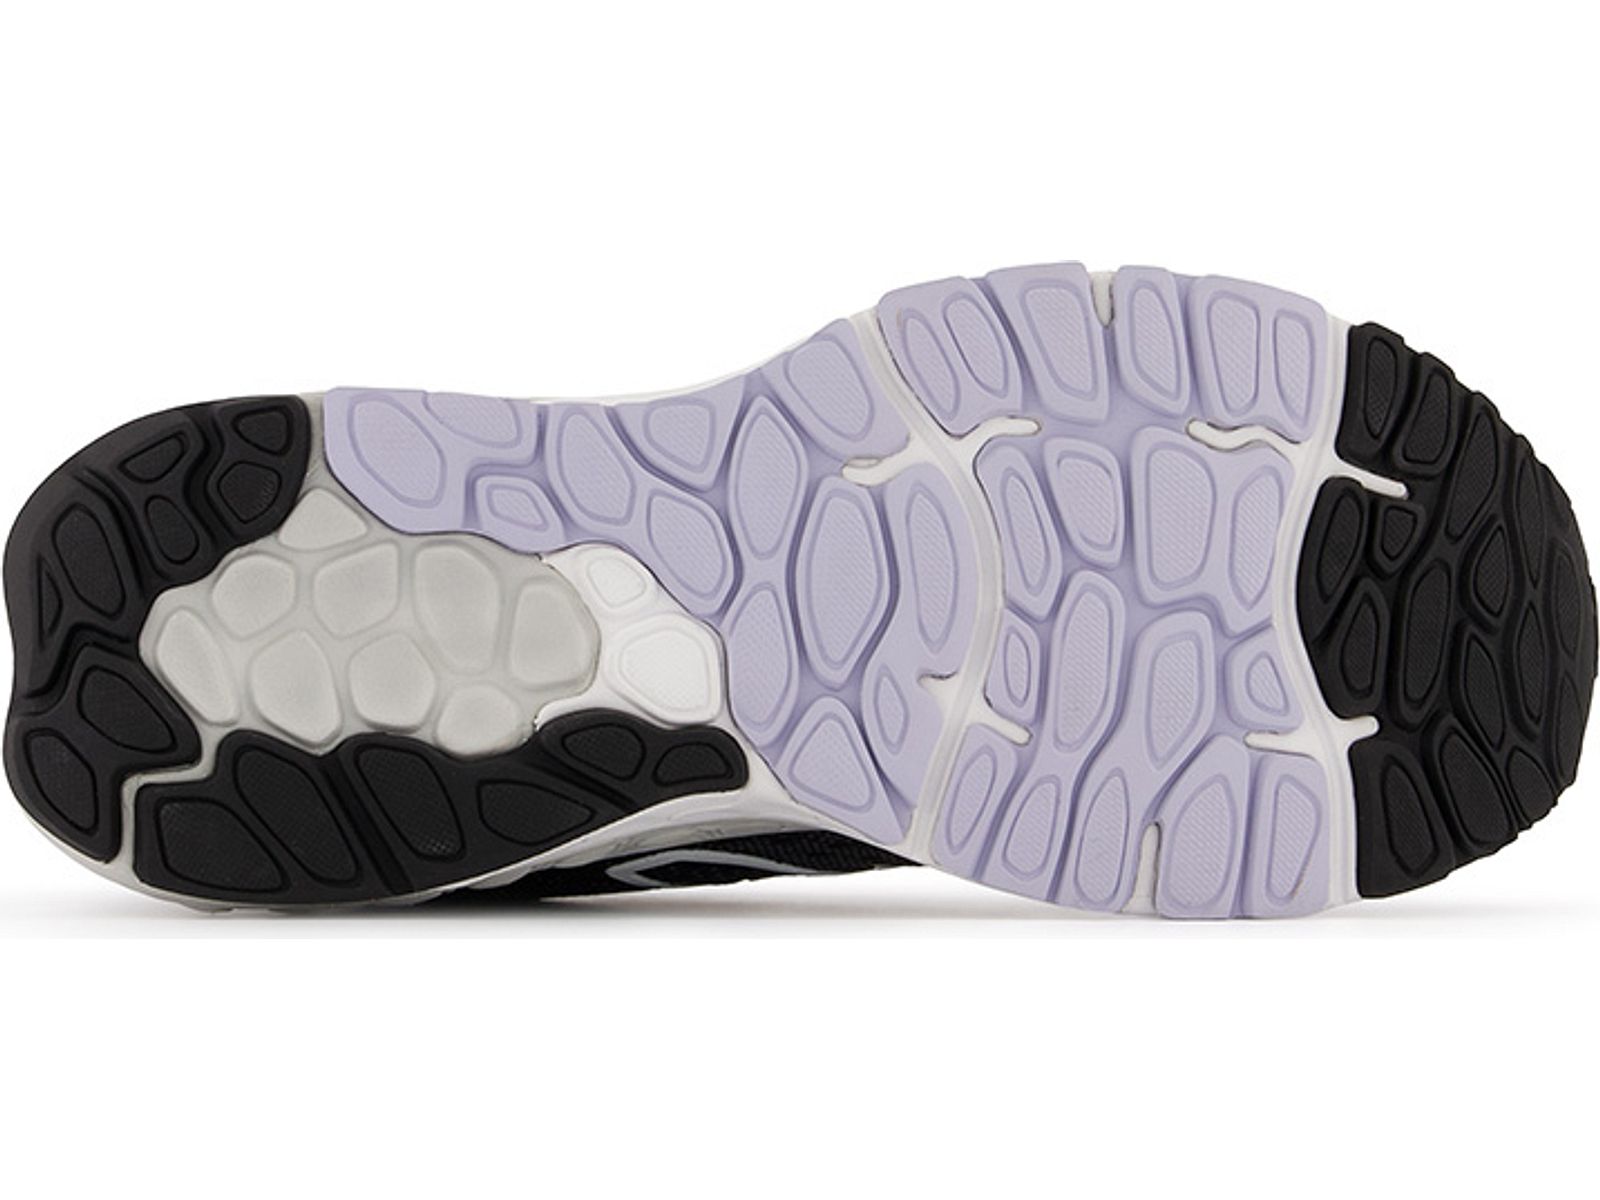 Bottom (outer sole) view of the Women's 880 V12 by New Balance in the color Black/Violet Haze